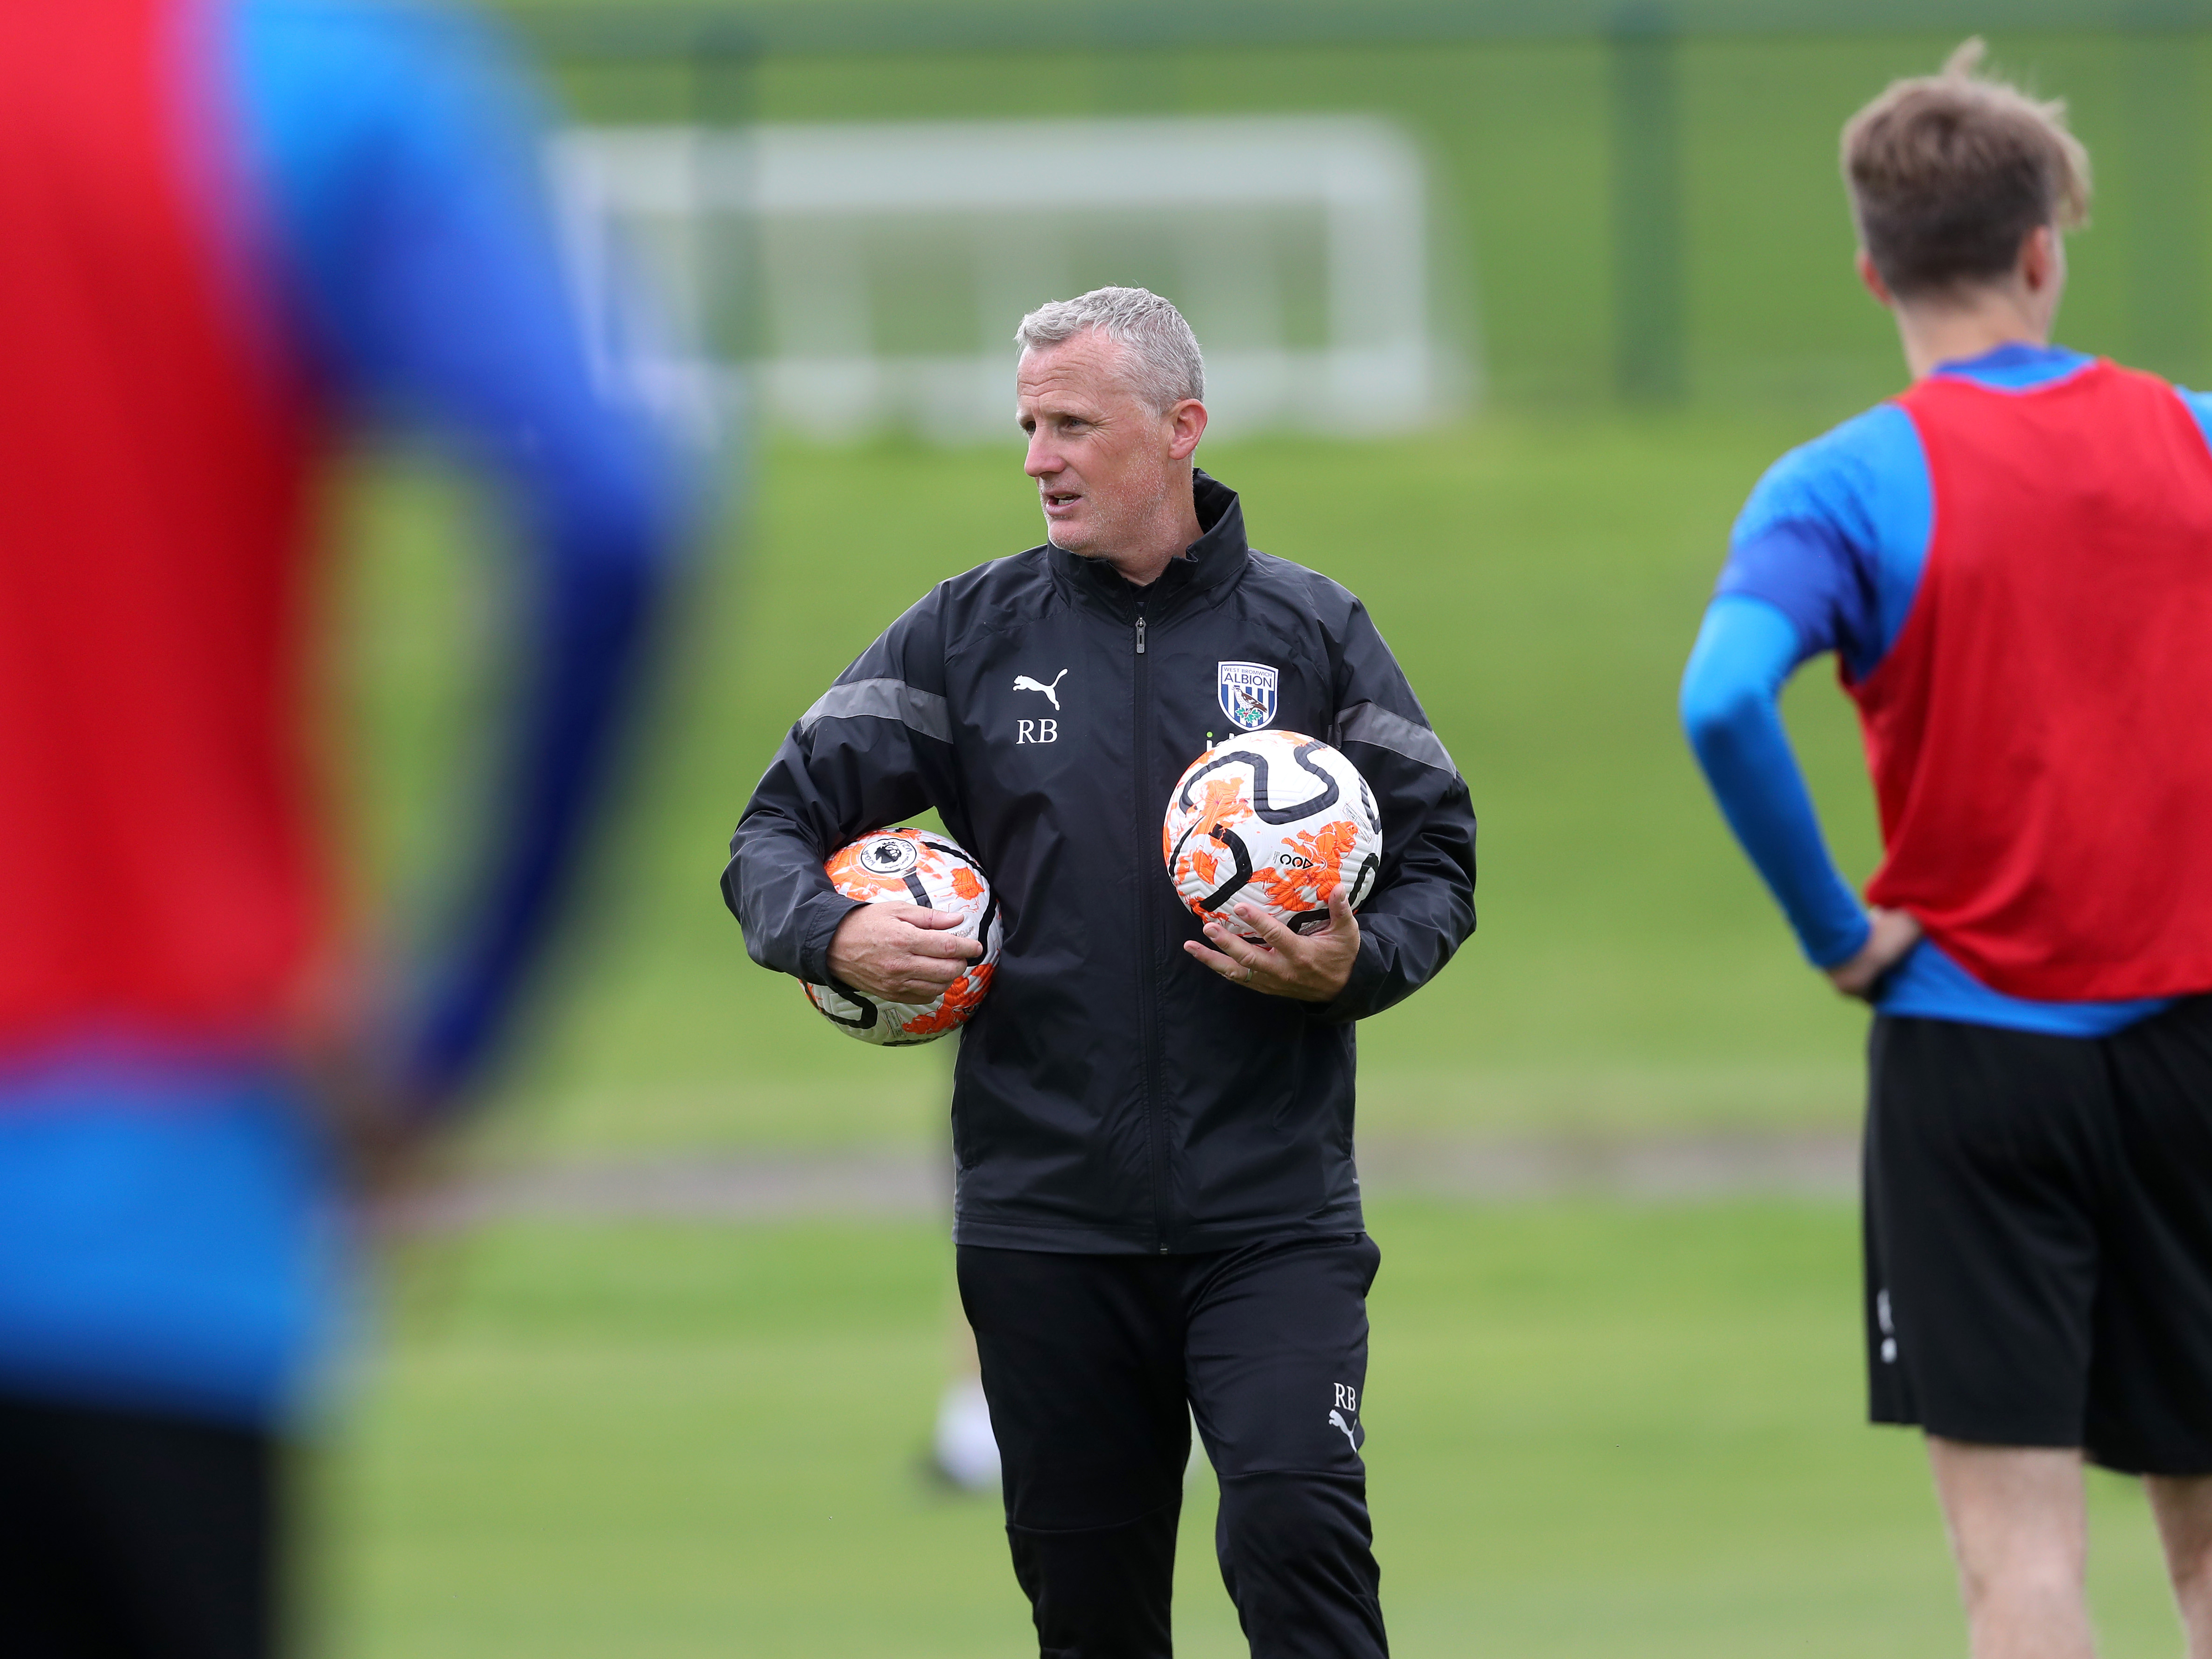 A photo of Under-21s boss Richard Beale holding two footballs while handing out instructions to Albion's academy prospects in training on the pitch